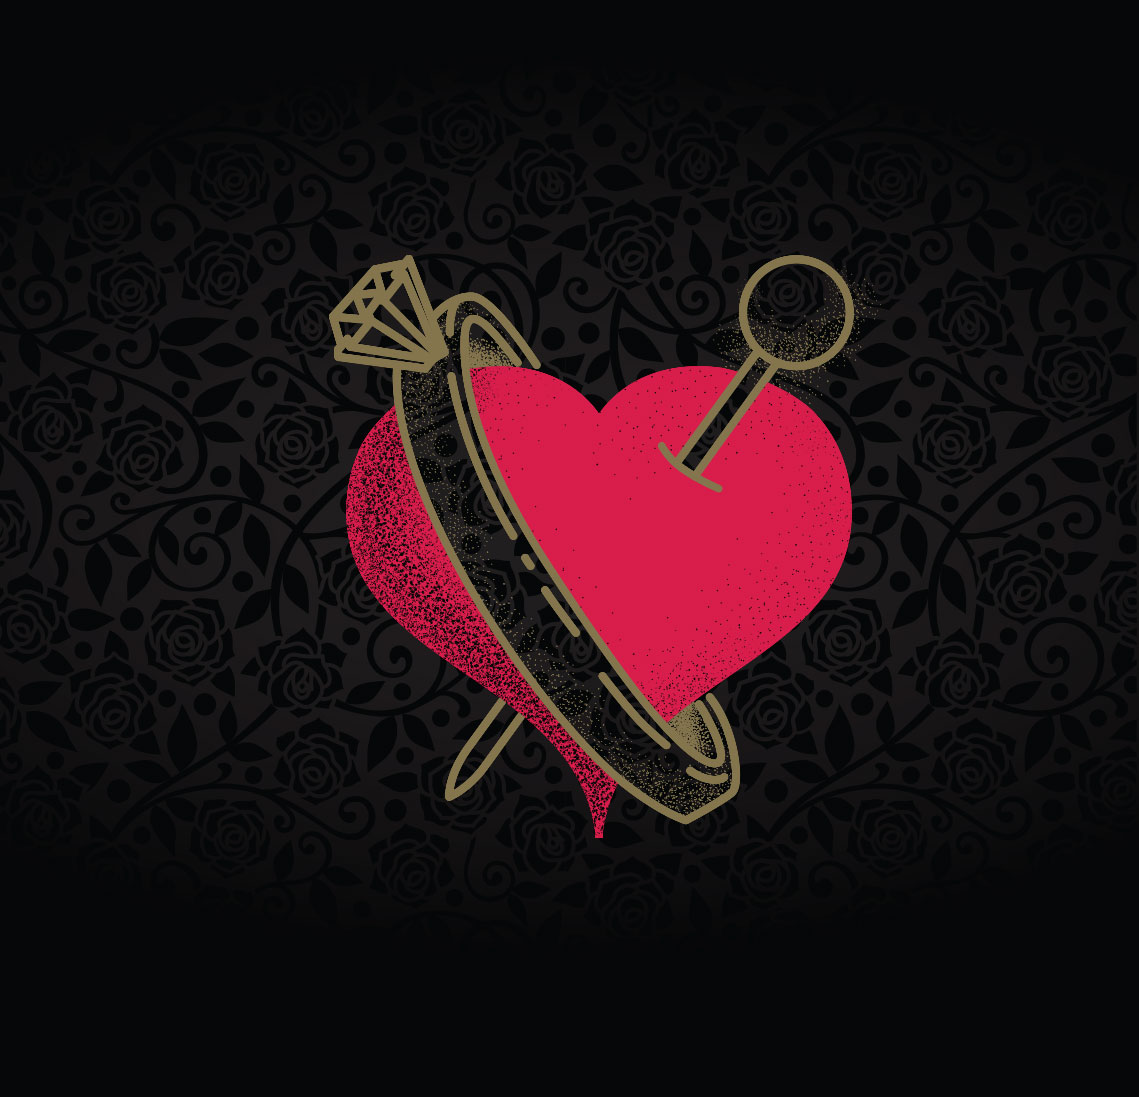 heart with a wedding ring and a pin on a black rose textured background